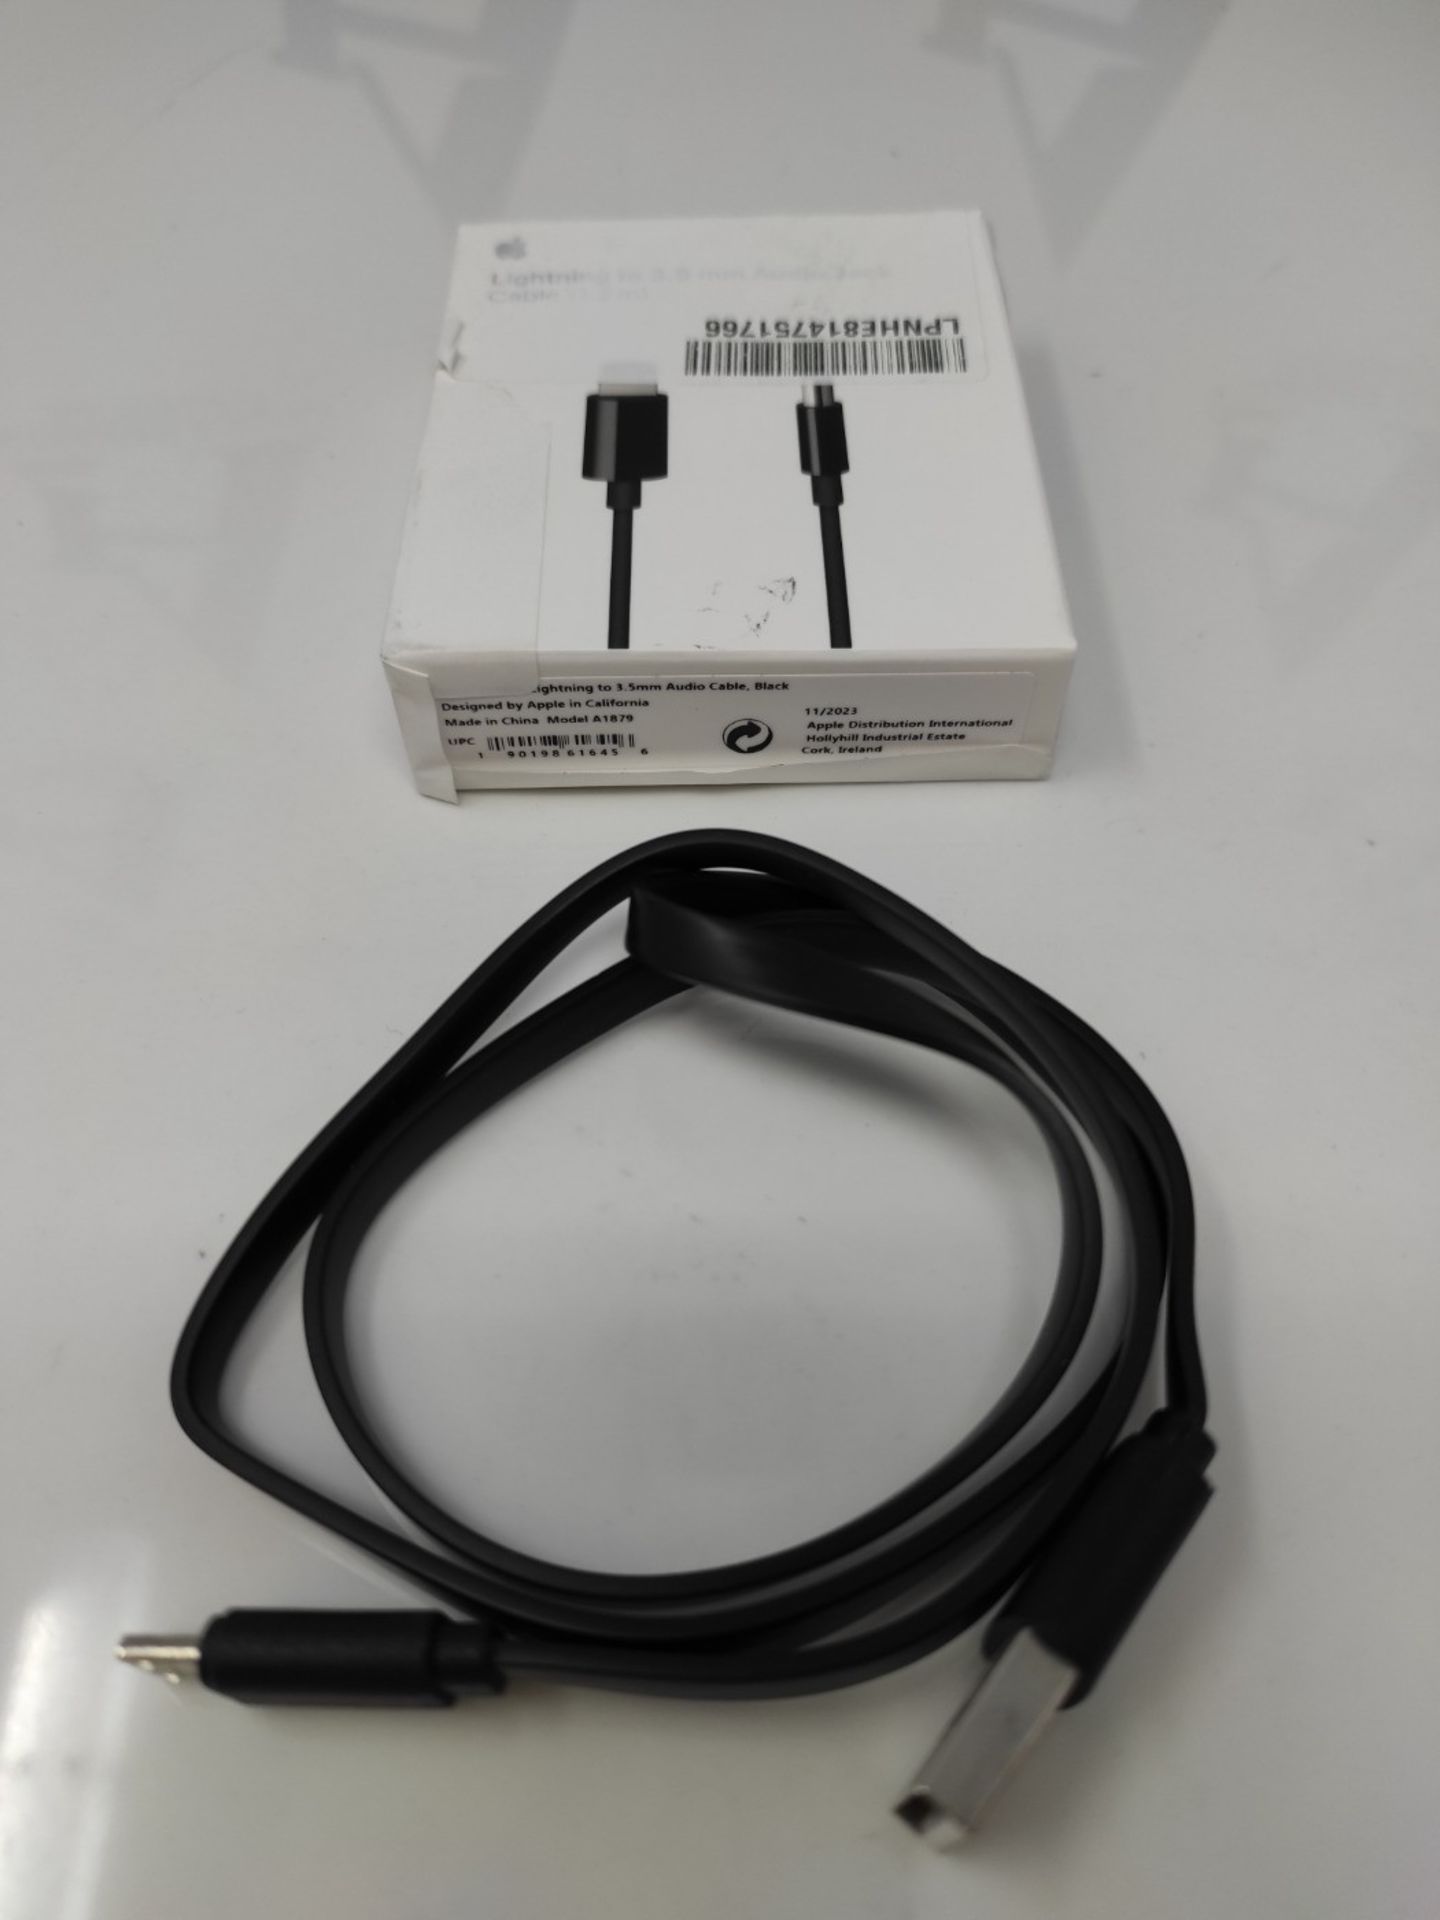 Apple Lightning to 3.5mm Audio Cable (1.2m) - Black - Image 2 of 2